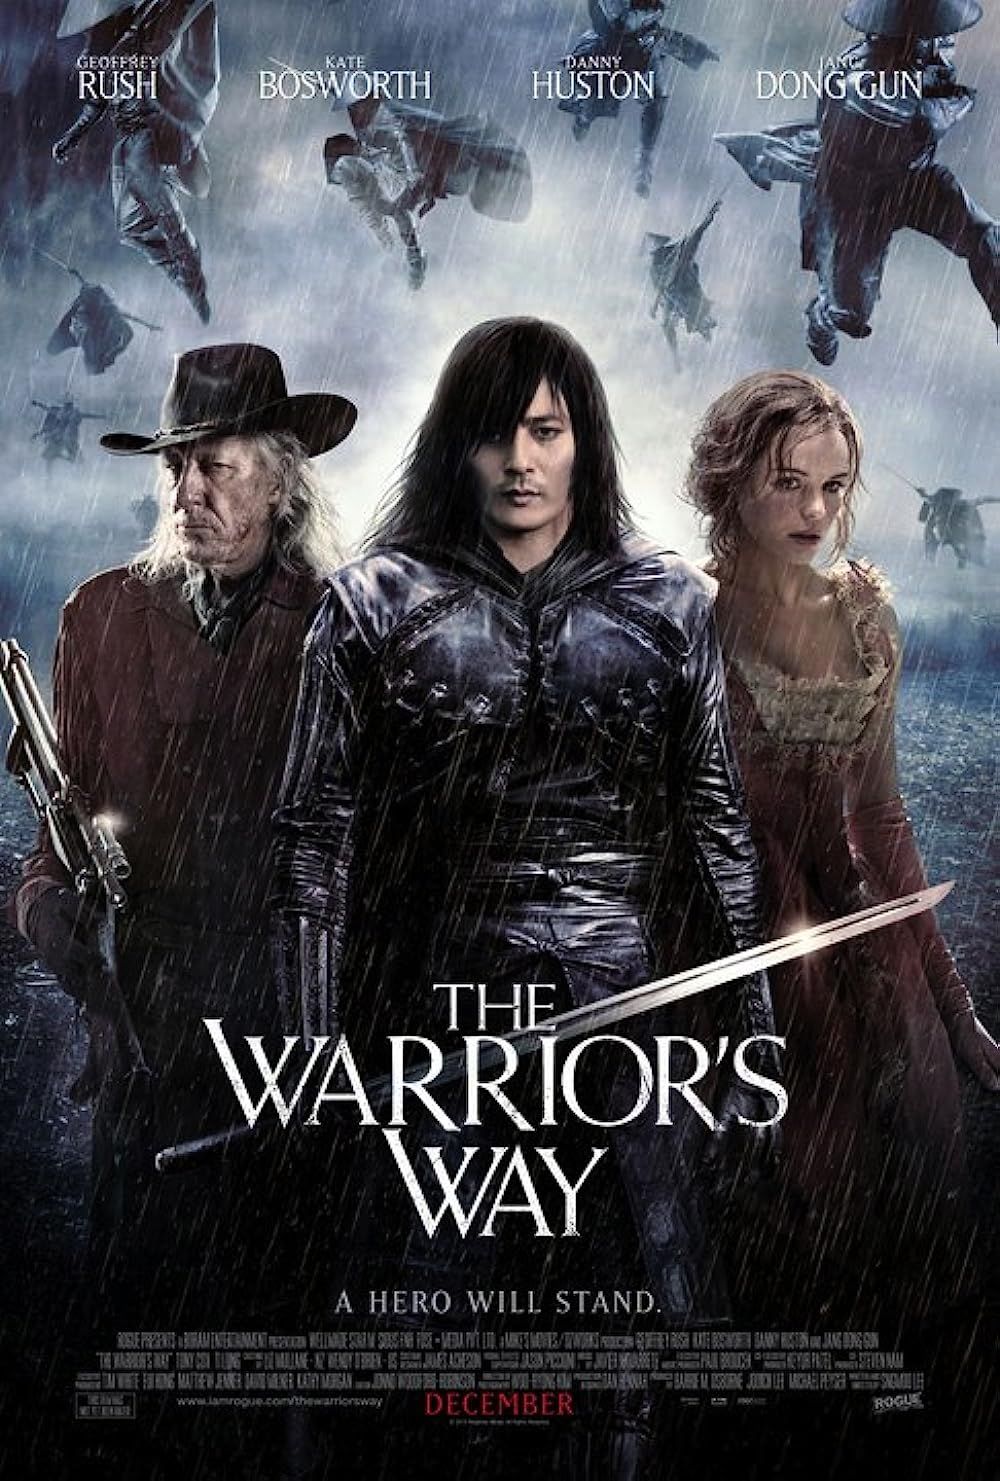 The Warriors Way (2010) Hindi Dubbed BluRay download full movie